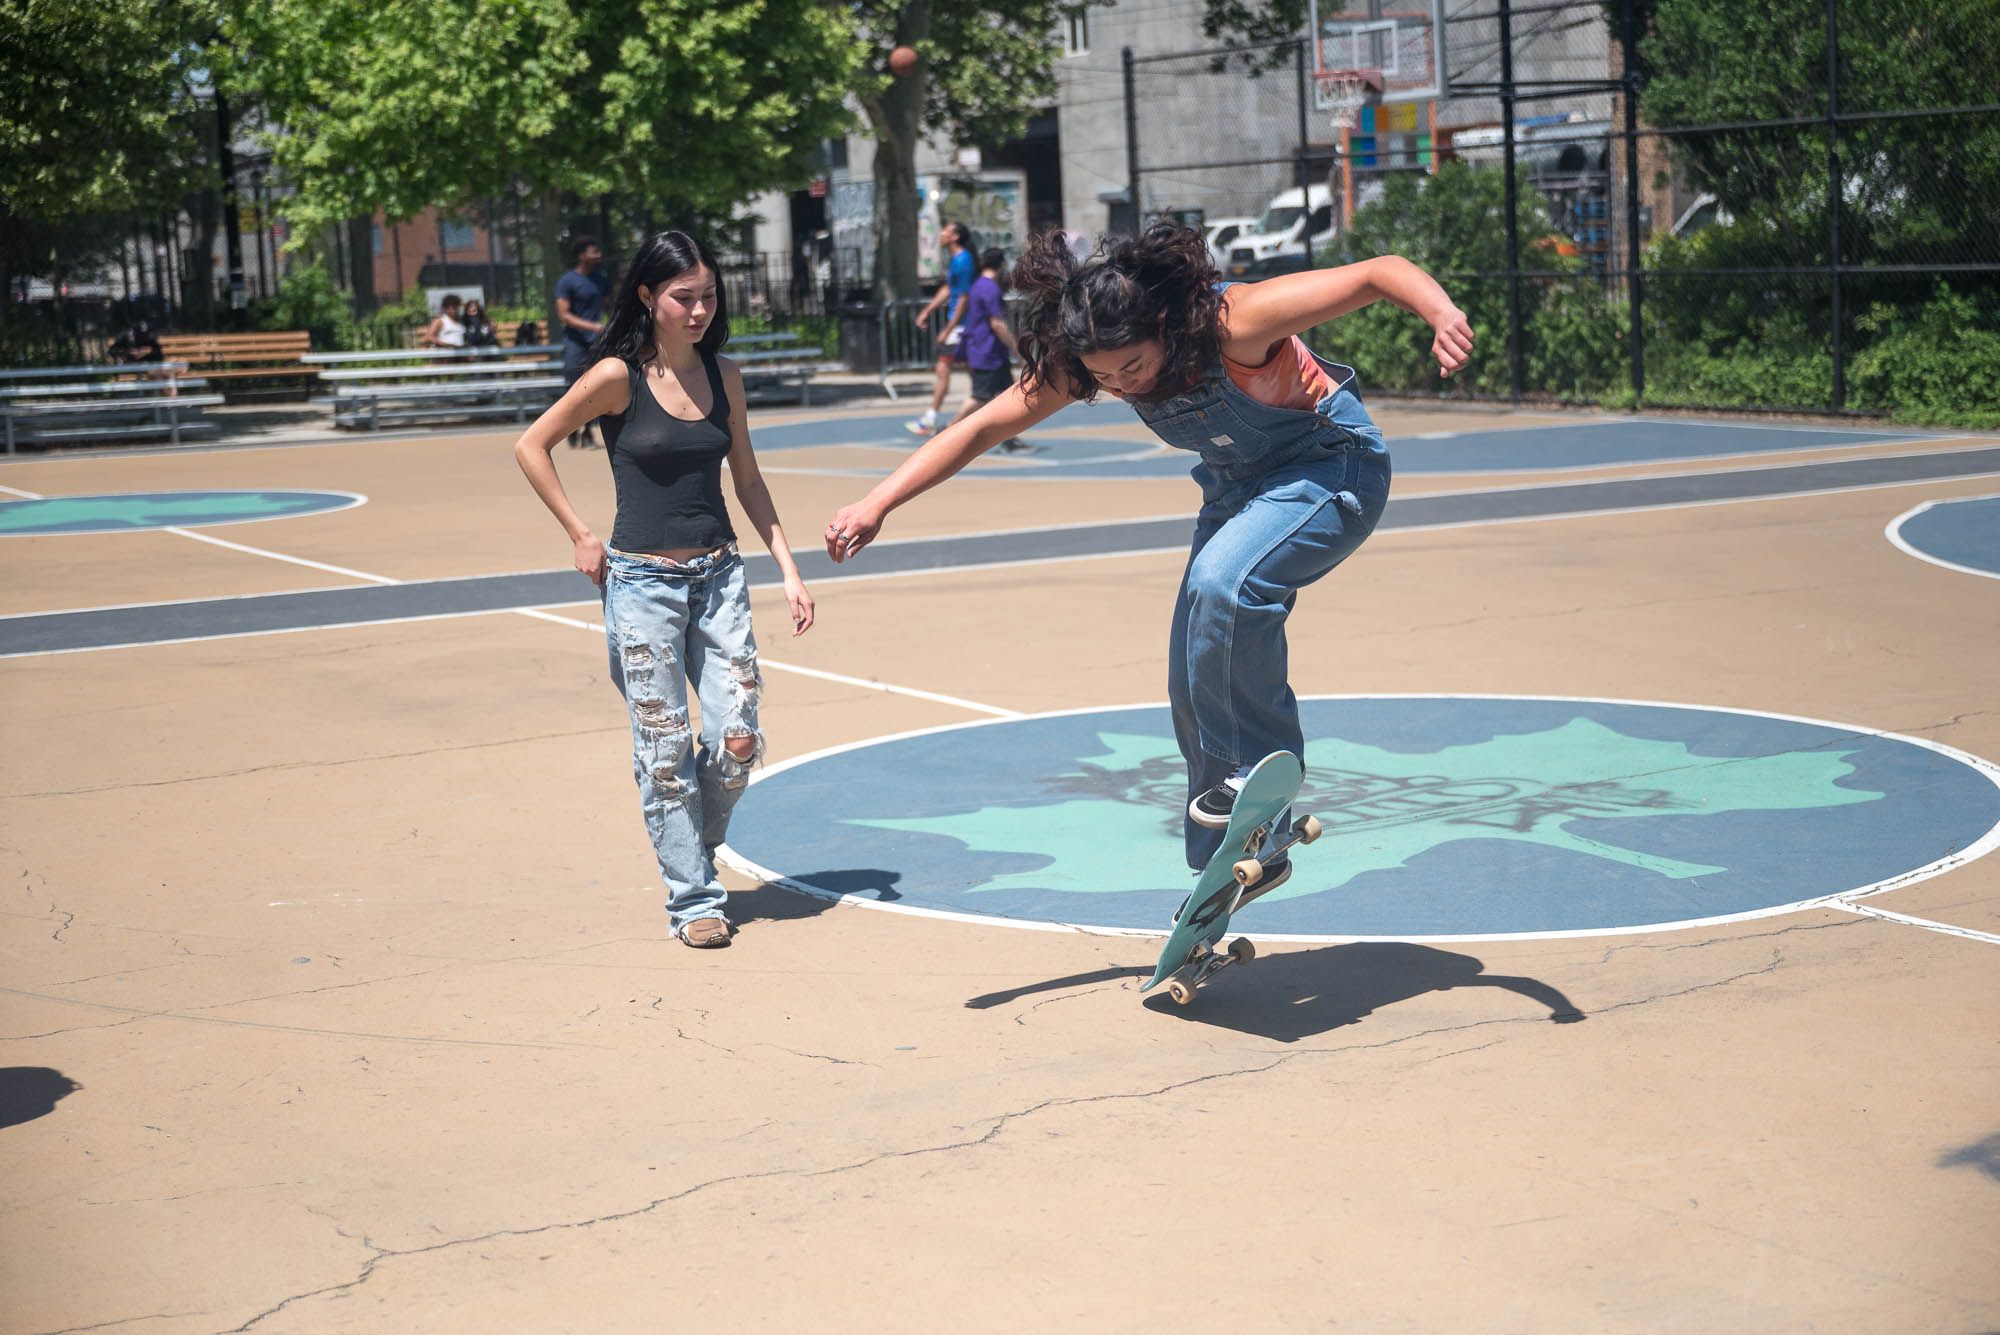 One woman doing a trick on a skateboard while another one watches at a park in Brooklyn.